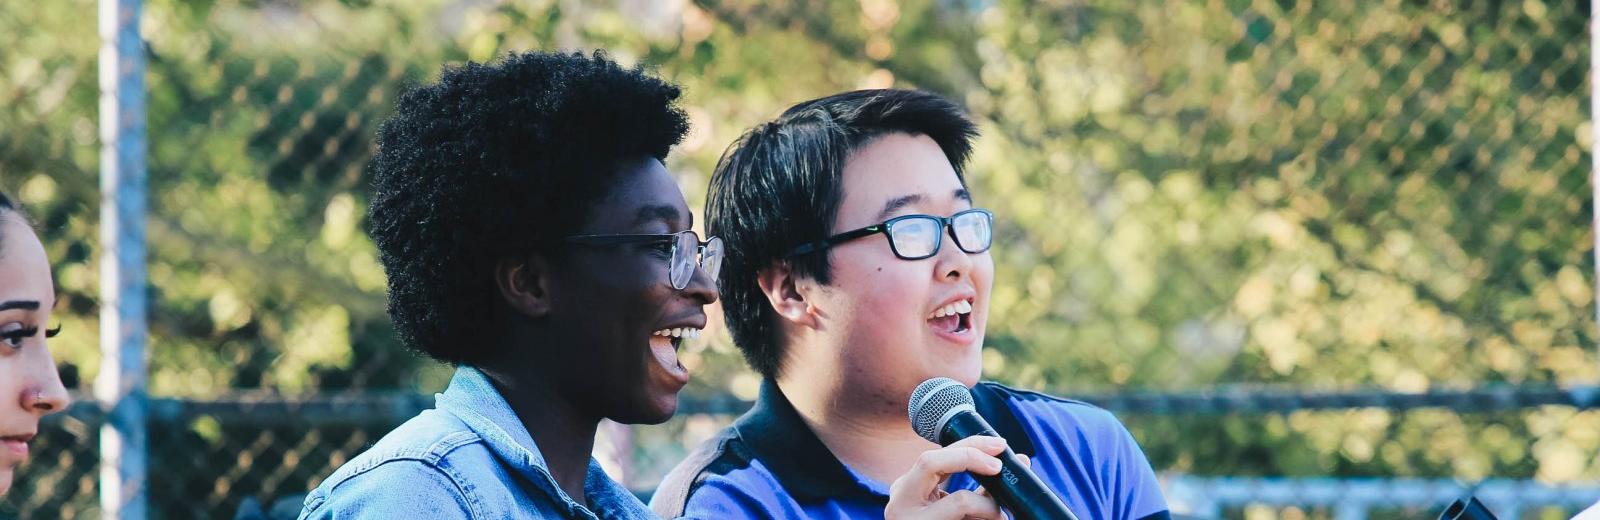 Two teens animatedly speak into a microphone, with trees and leaves in the background